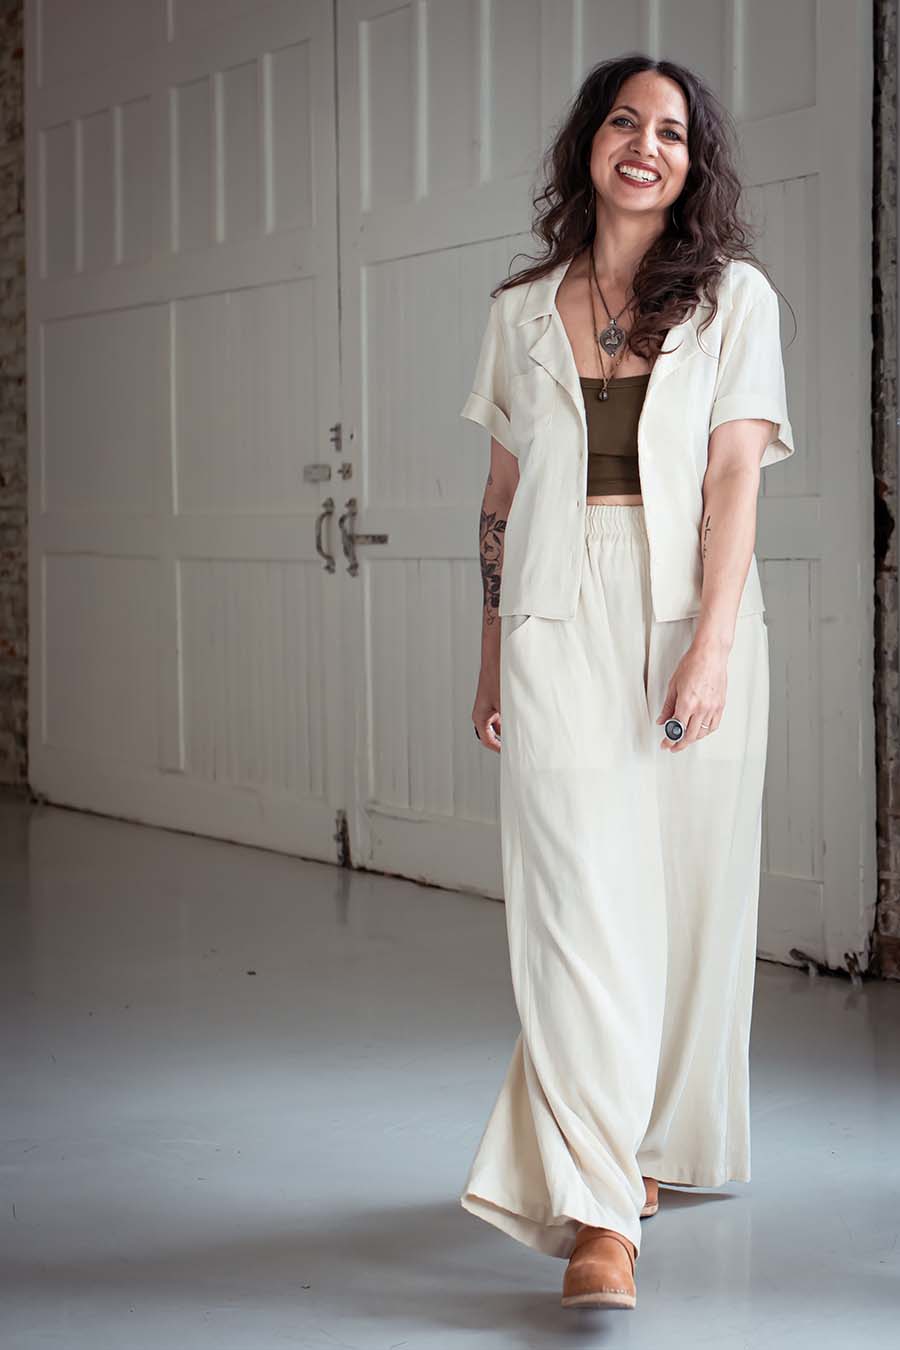 Meg wearing cream view a chanterelle pants and. cream jonie top over an olive tank